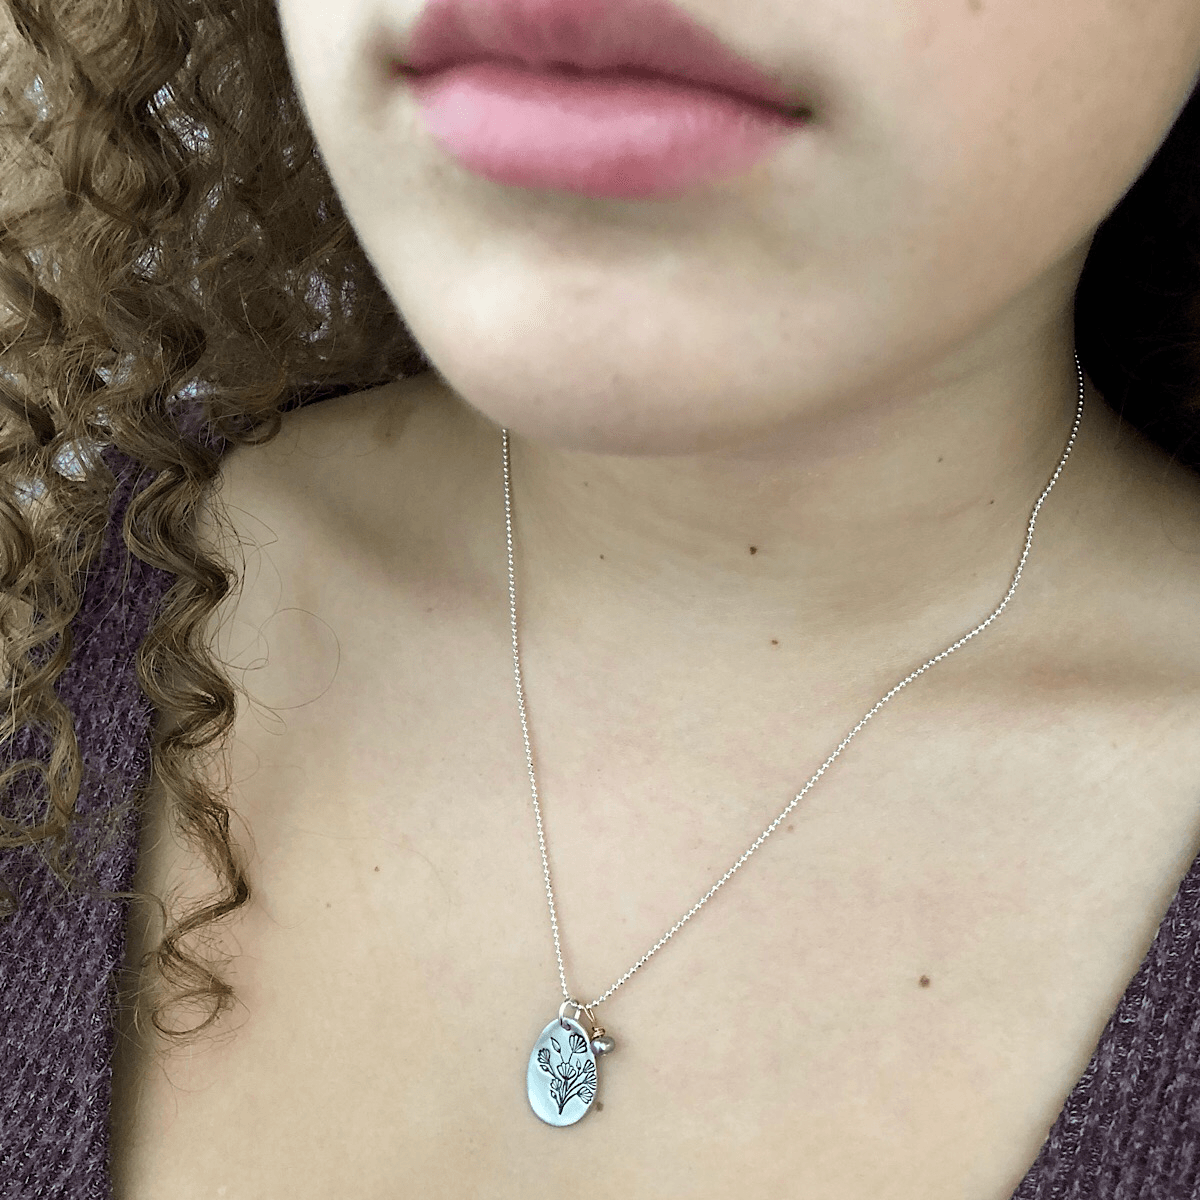 Beauty Within Pebble Necklace - IsabelleGraceJewelry